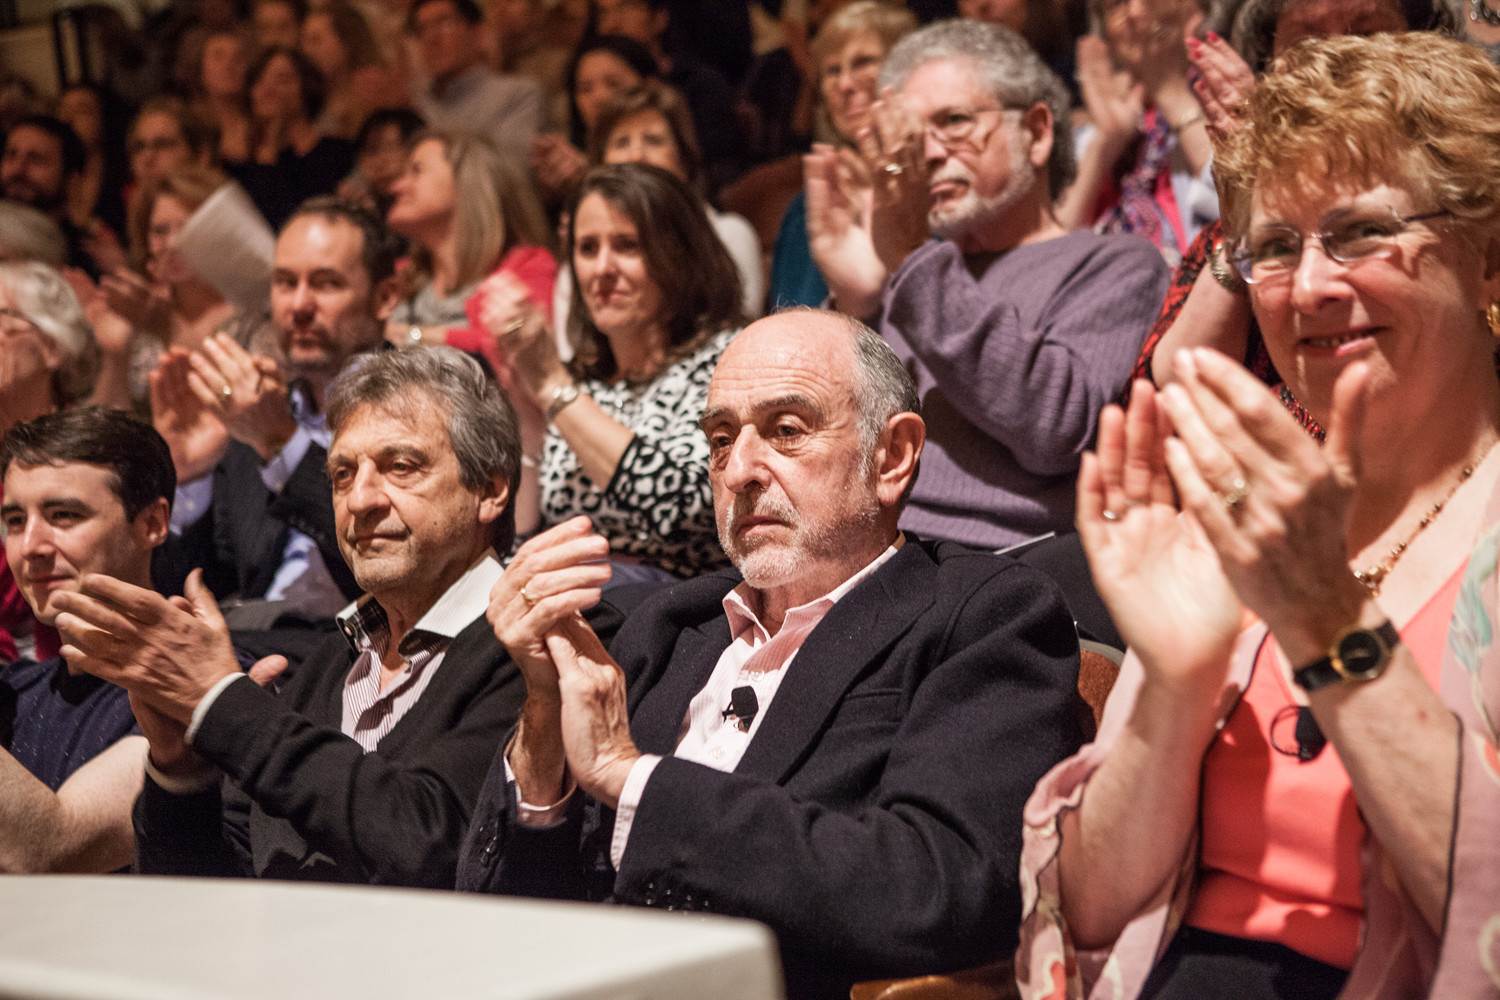 Alain Boublil, center left, and Claude-Michel Schönberg, center right, applaud a performance of their music. (Photos by Çoe Sweet)